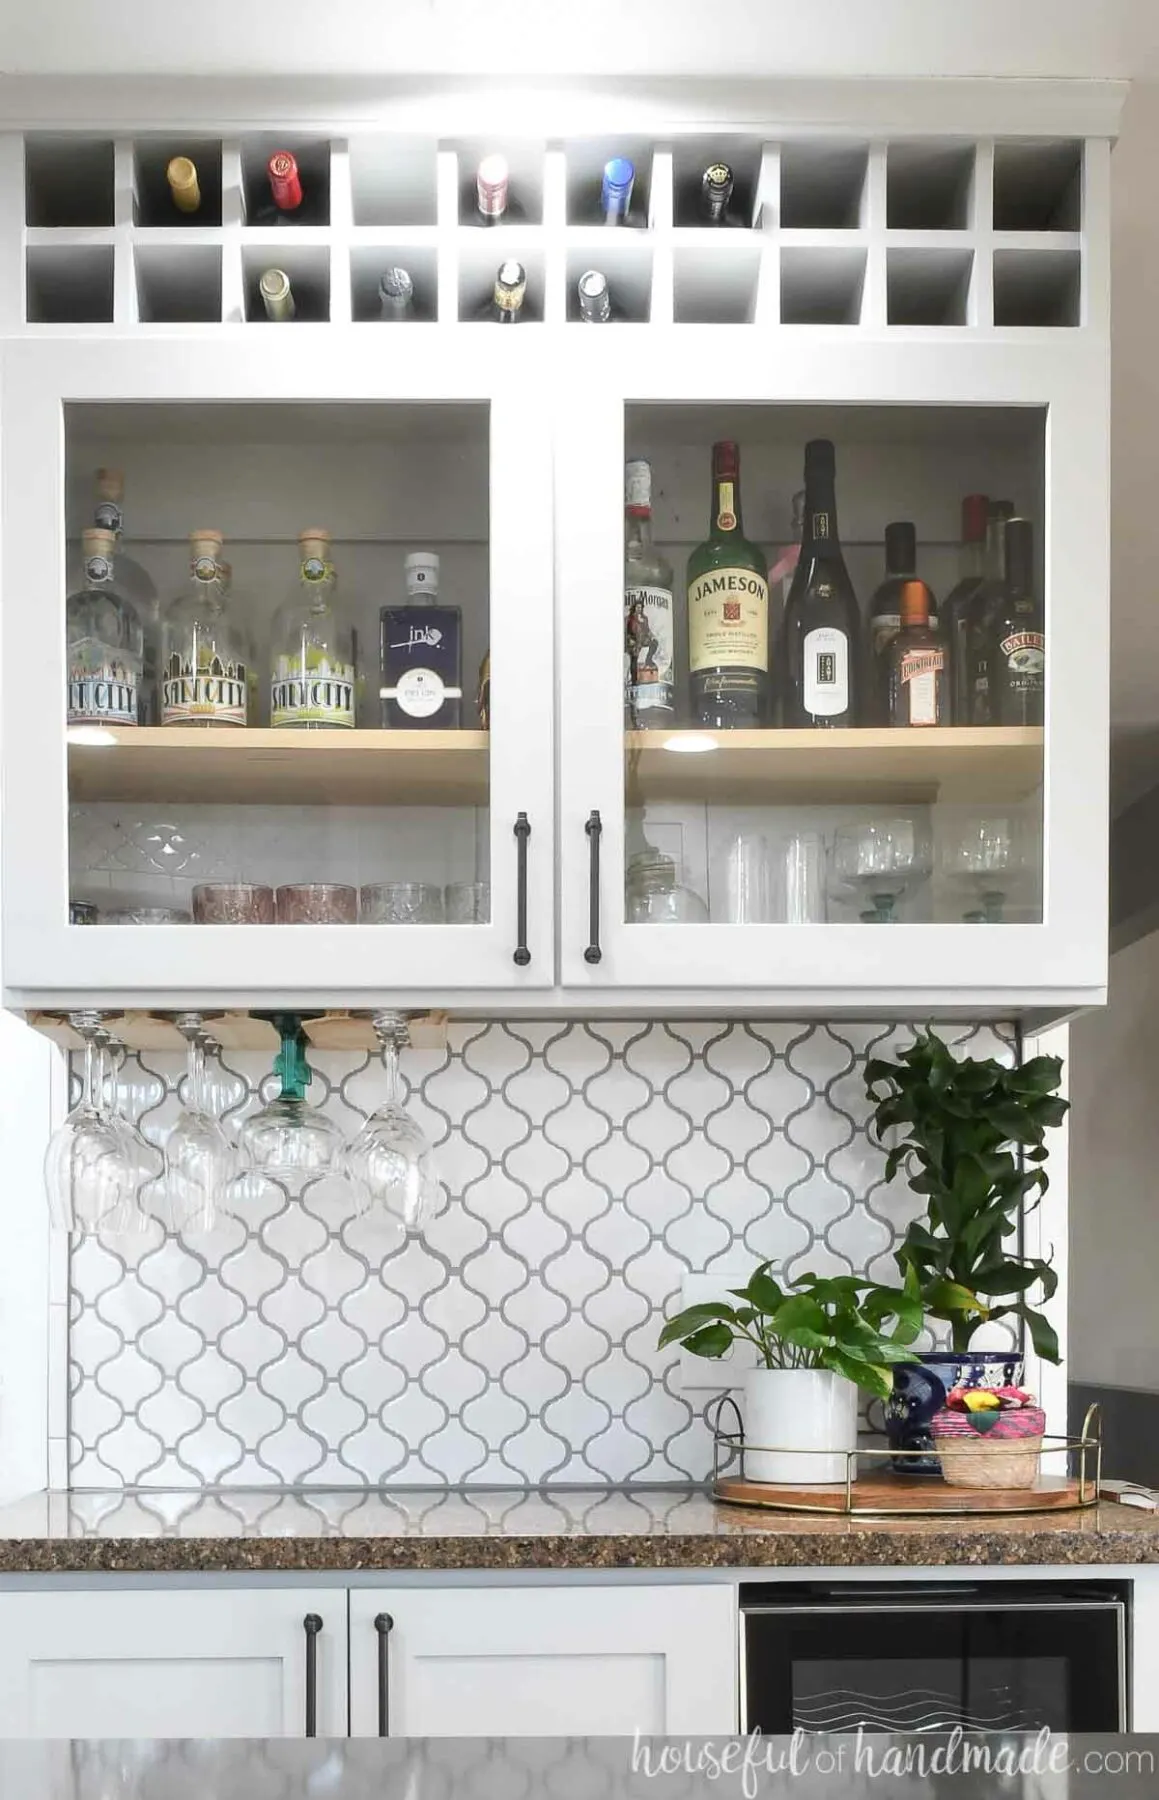 Dry bar cabinet with glass panel doors and square cubbies on top to hold wine bottles.